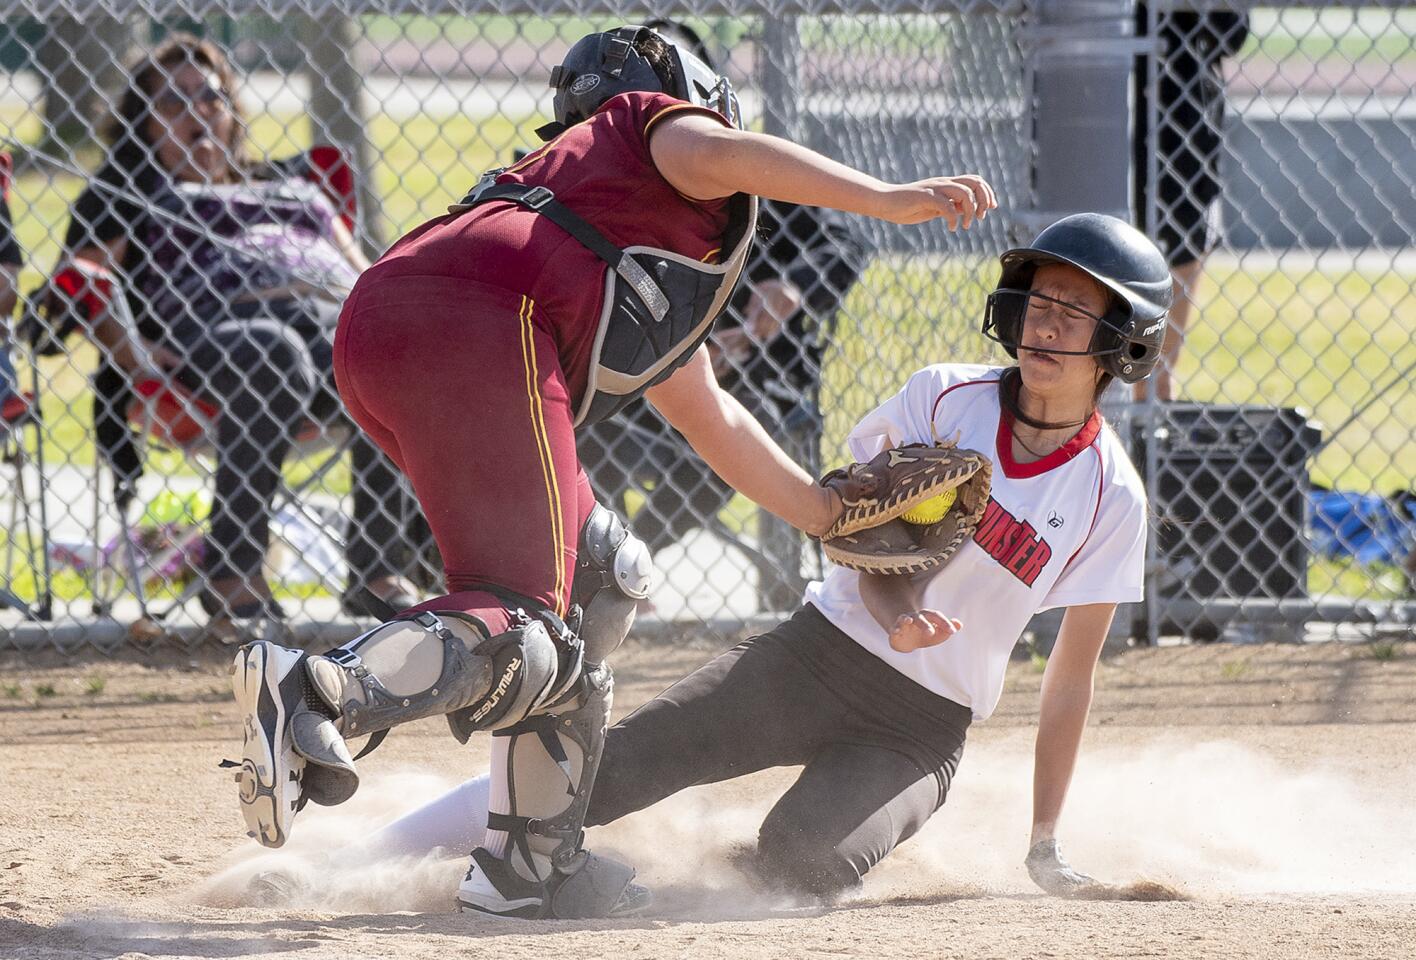 Ocean View's Nivea Armenta tags out Westminster's Christine Nguyen on a stolen base attempt in the fifth inning during a nonleague game on Wednesday, April 18.